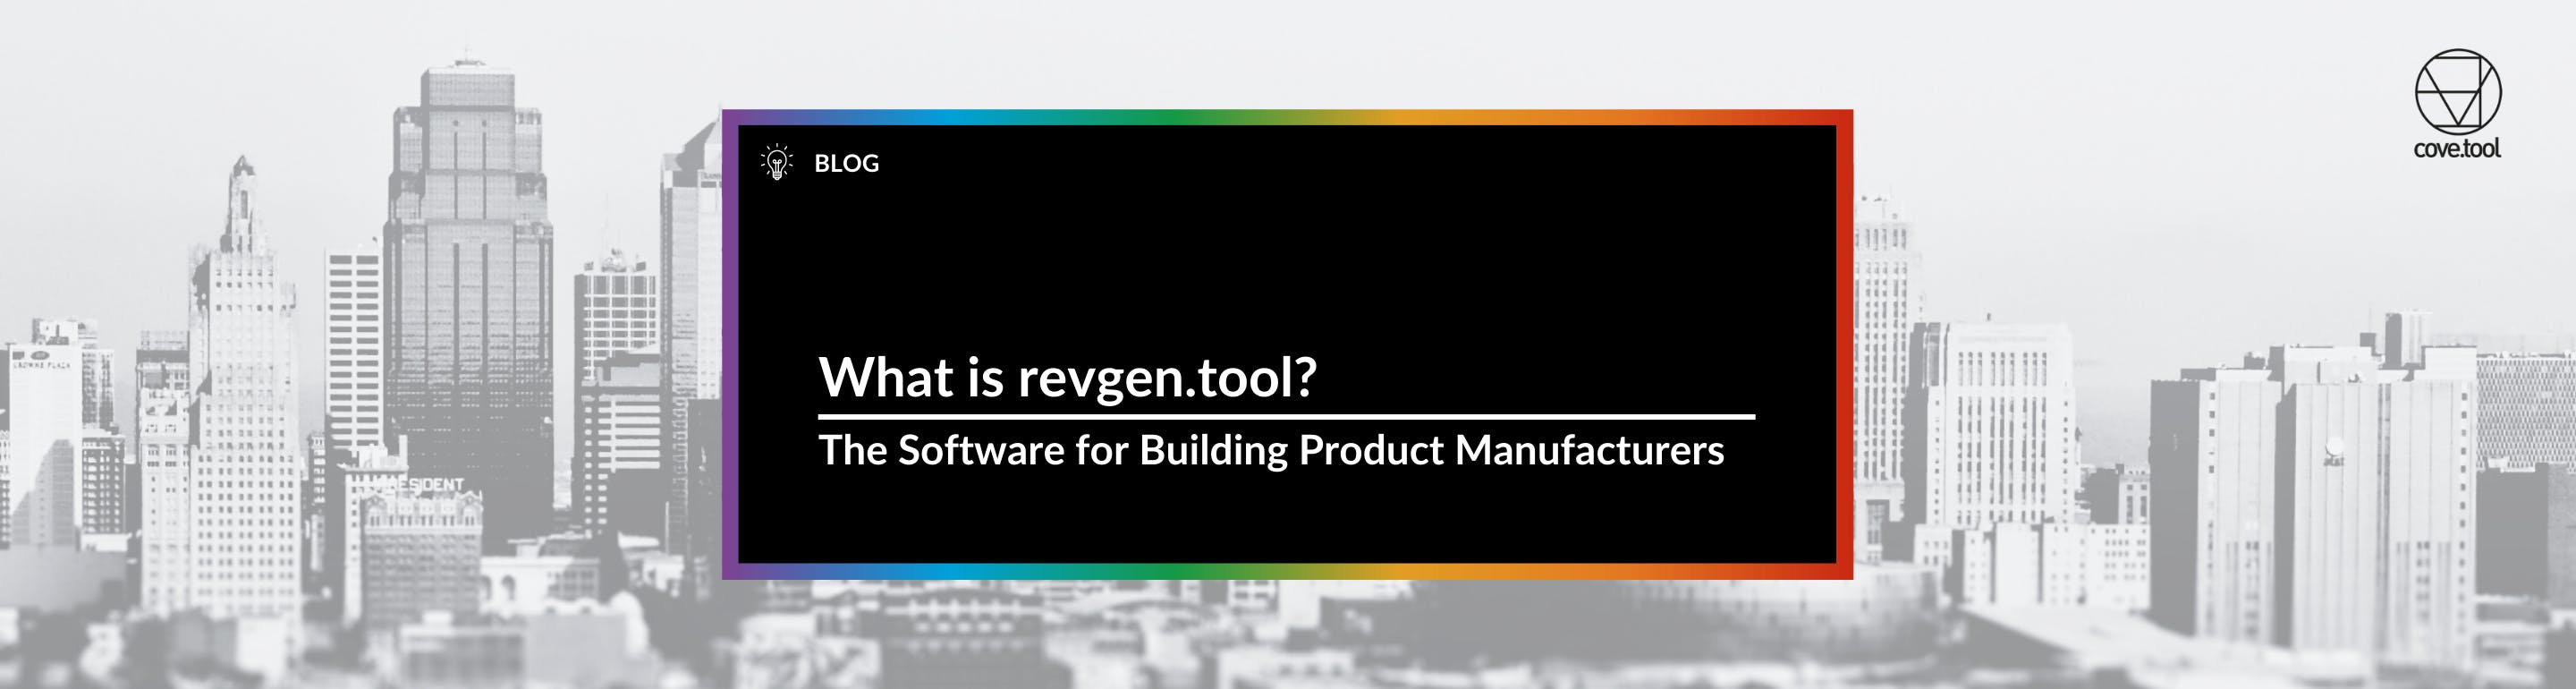 revgen.tool: the Software for Building Product Manufacturers